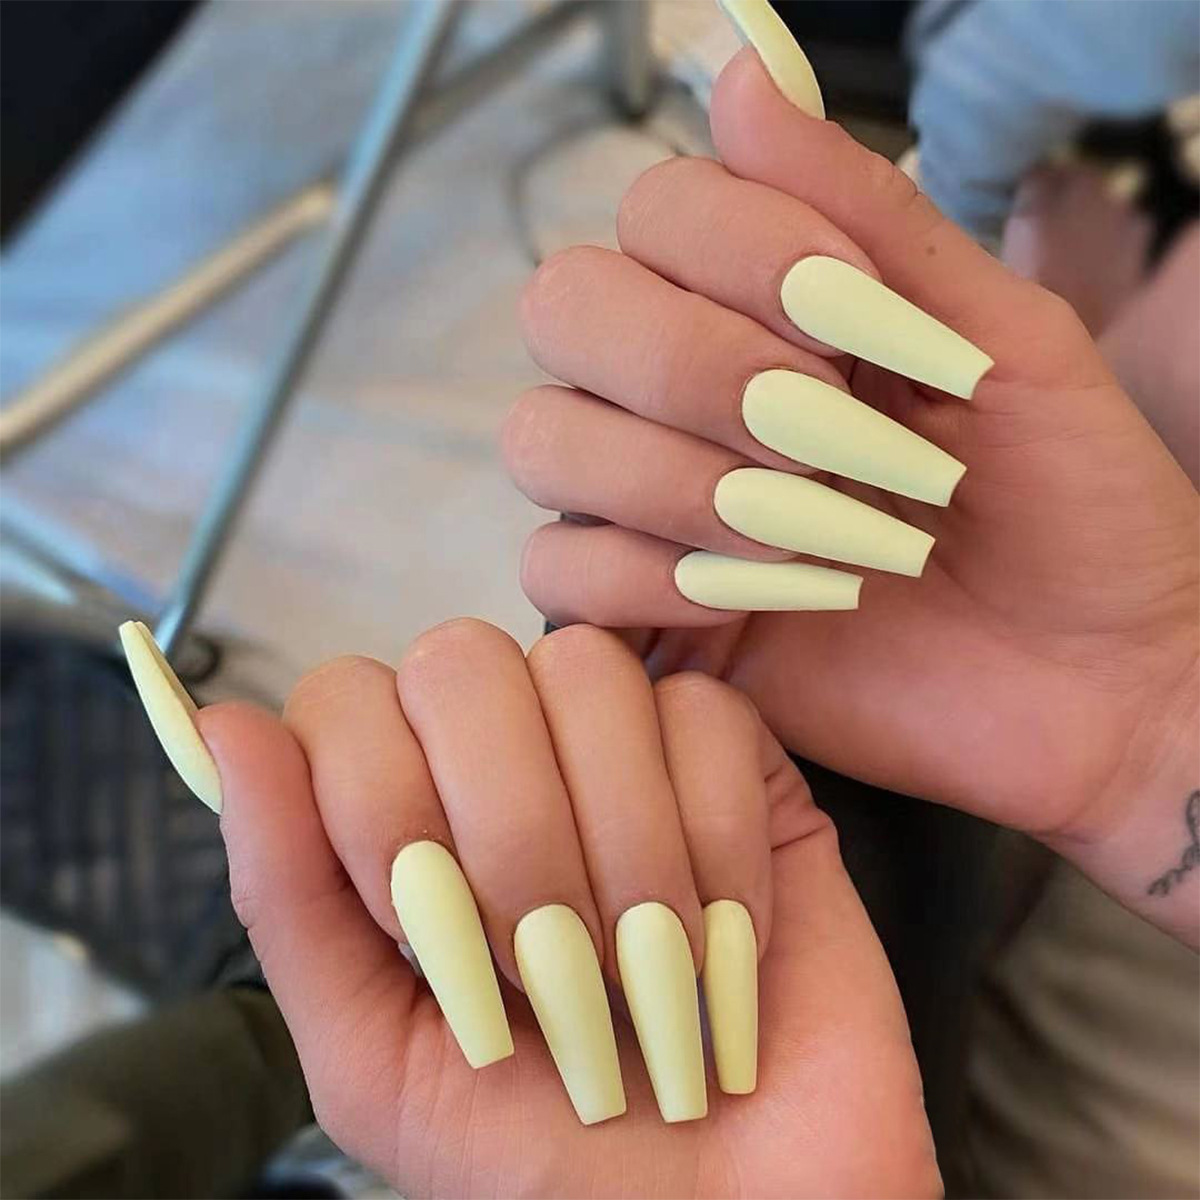 Ballerina-nails 75+ Hottest Looking Nail Shapes for Women in 2022